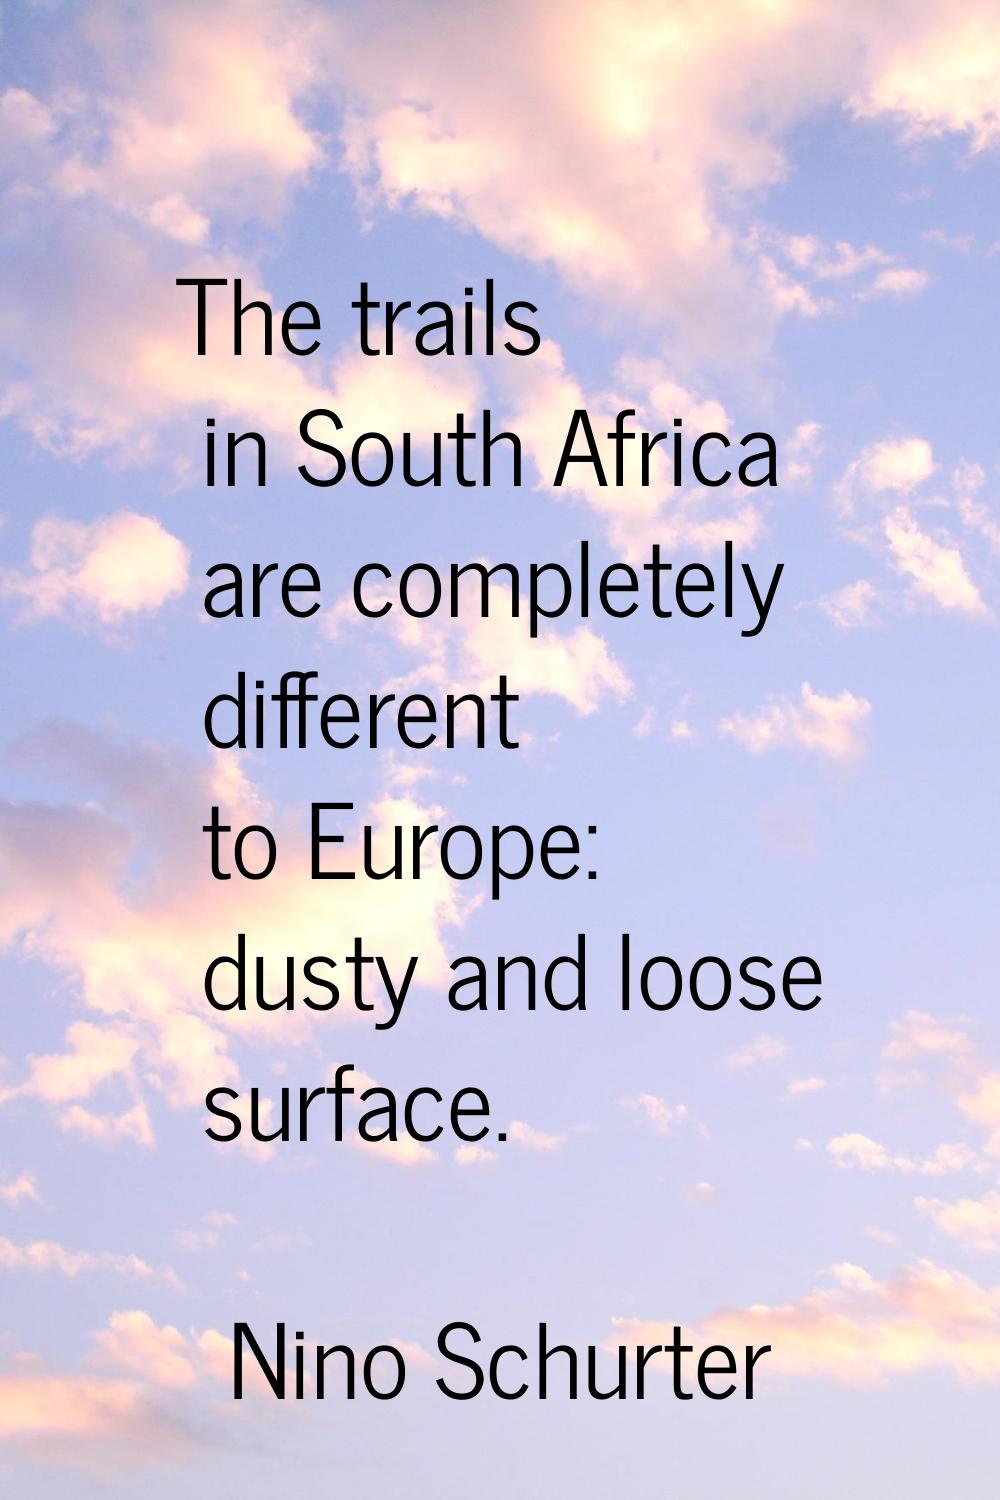 The trails in South Africa are completely different to Europe: dusty and loose surface.